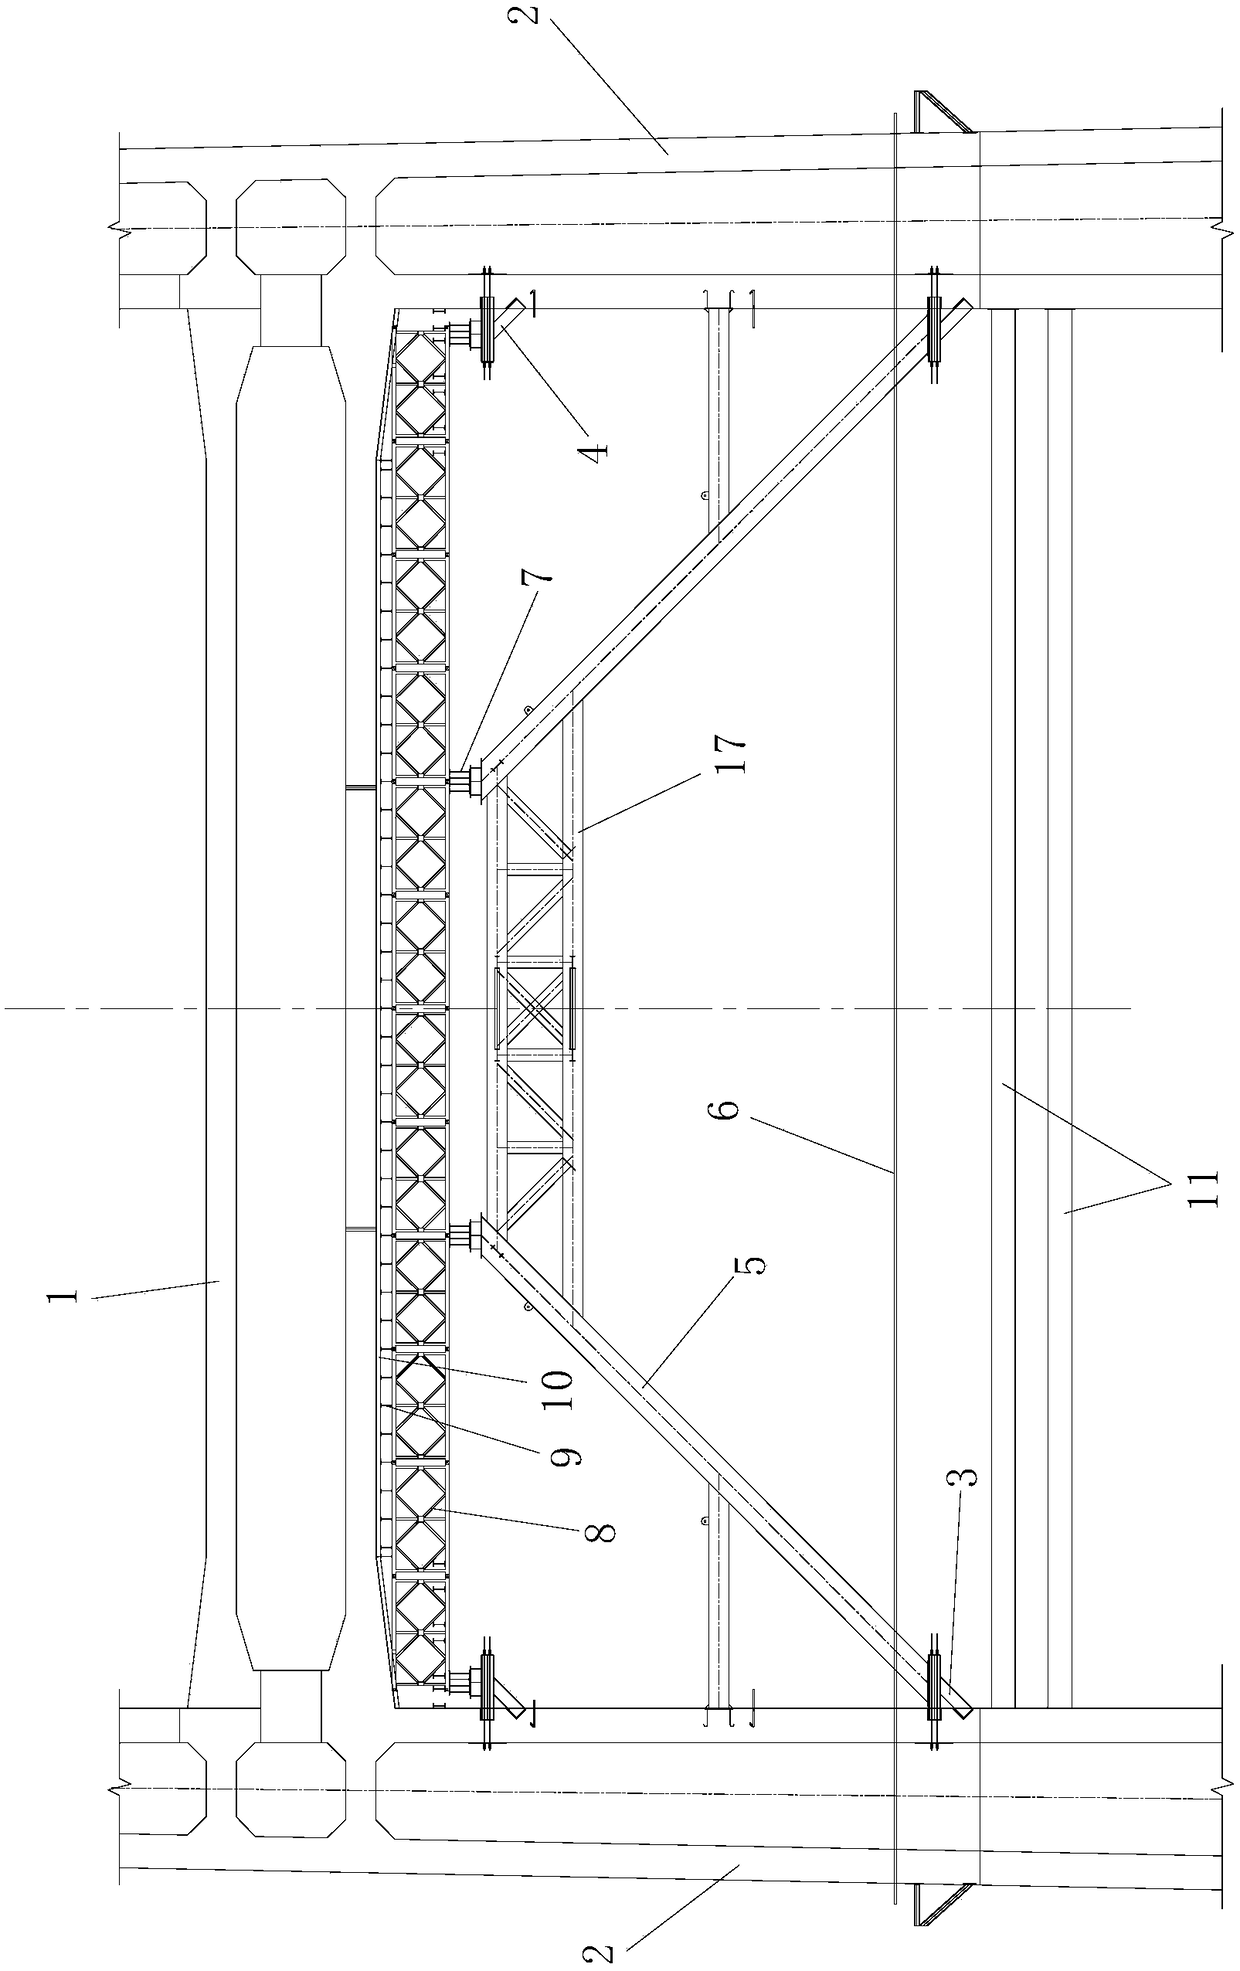 A high-altitude large-span heavy-duty beam construction support and construction method